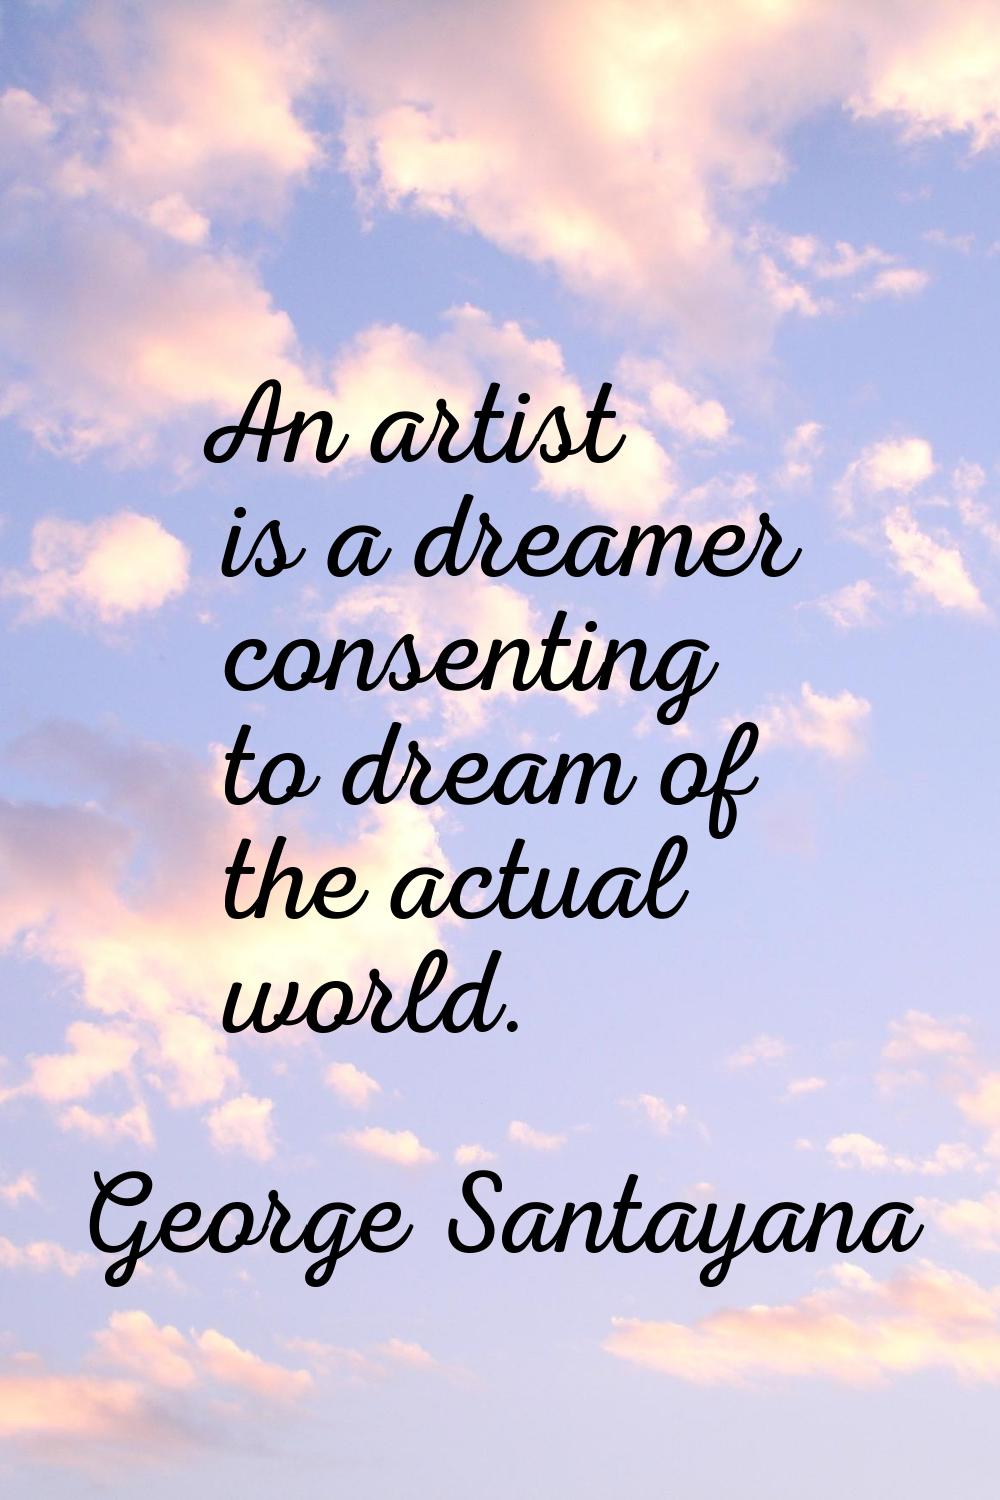 An artist is a dreamer consenting to dream of the actual world.